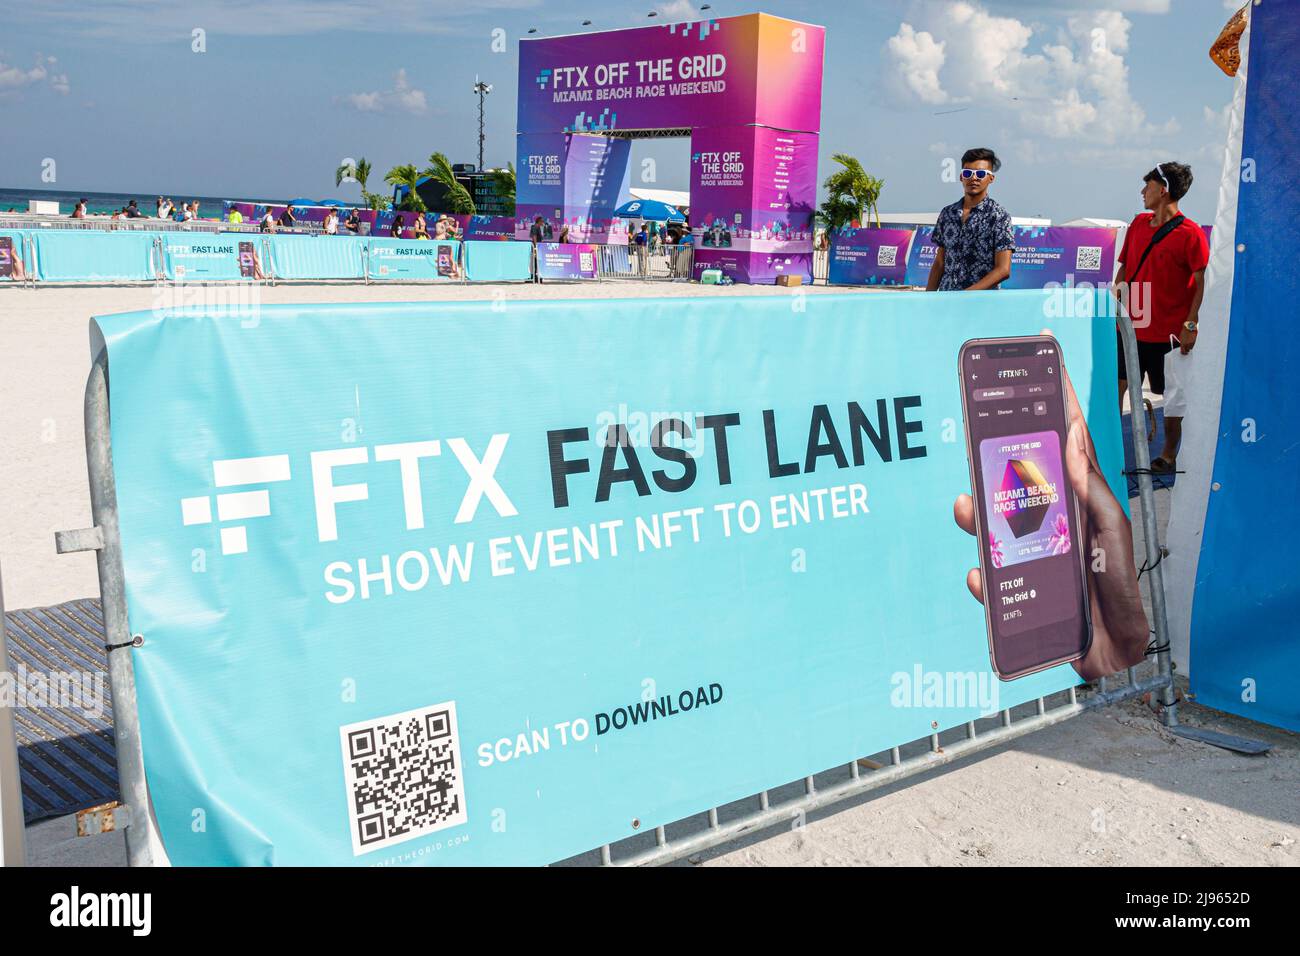 Miami Beach Florida,FTX Off the Grid event,Race Weekend Grand Prix Formula One 1 F1 racing event,sign NFT QR code scan download Stock Photo